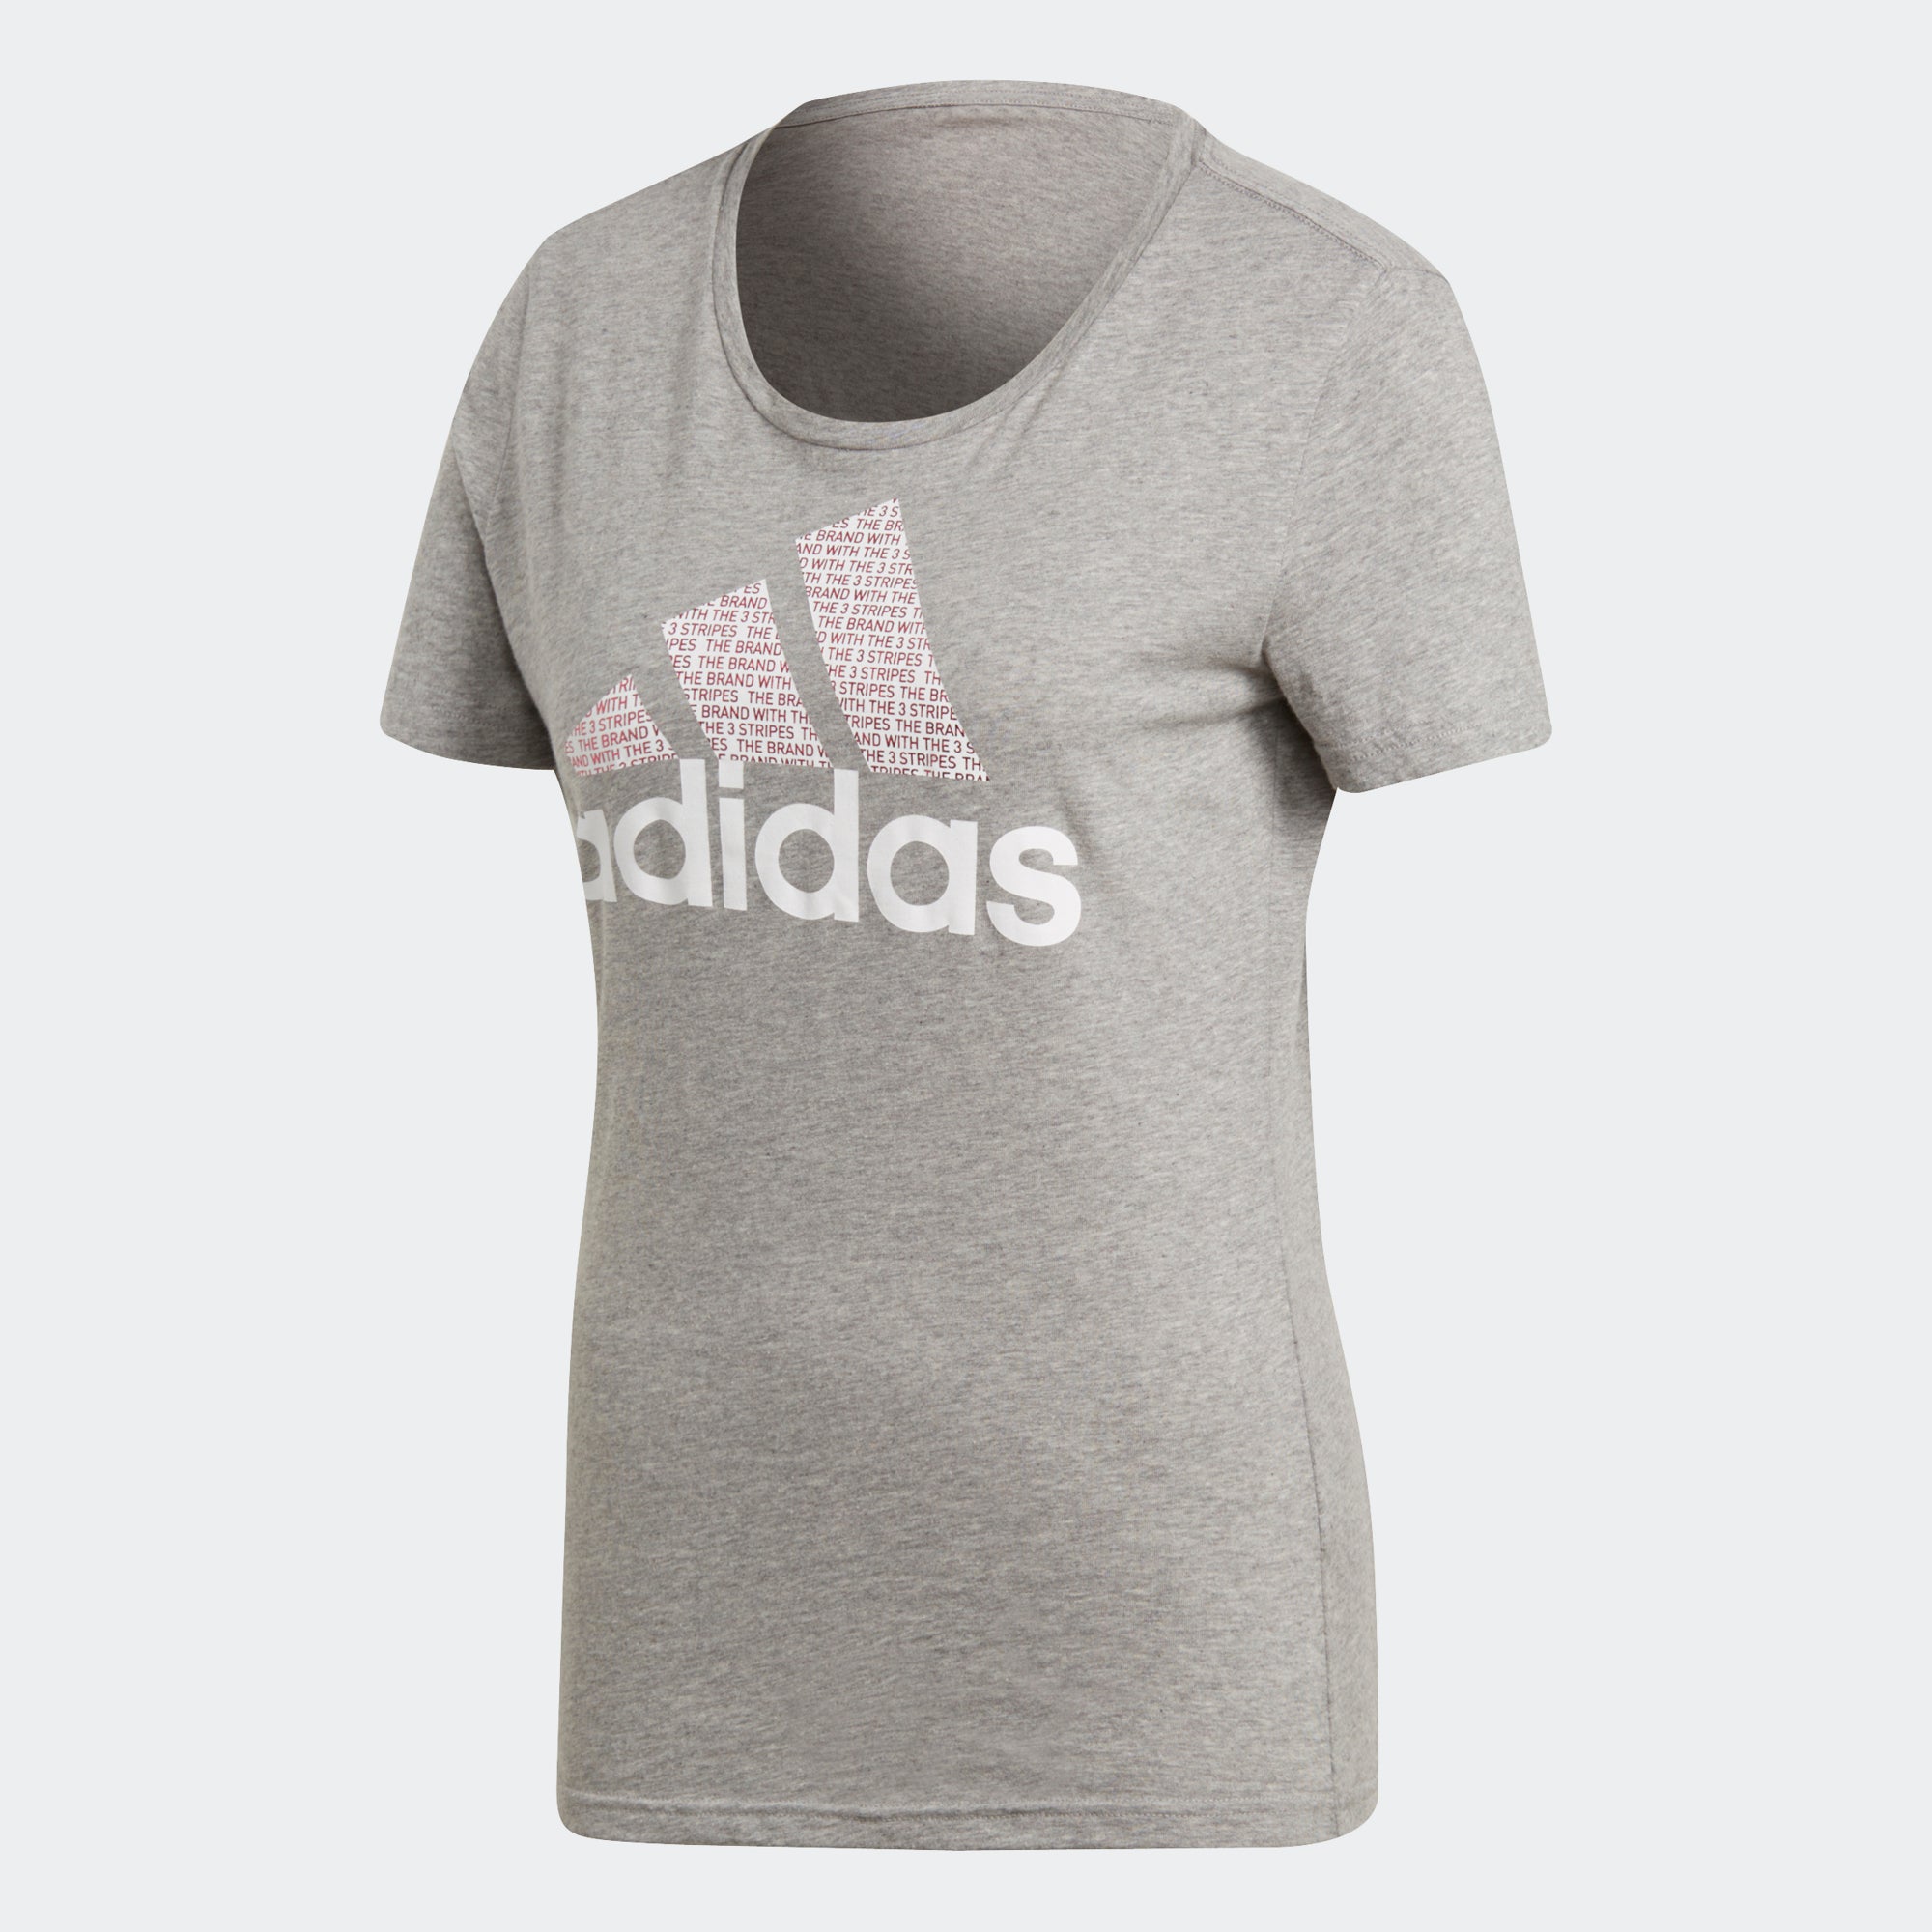 buy adidas clothes online